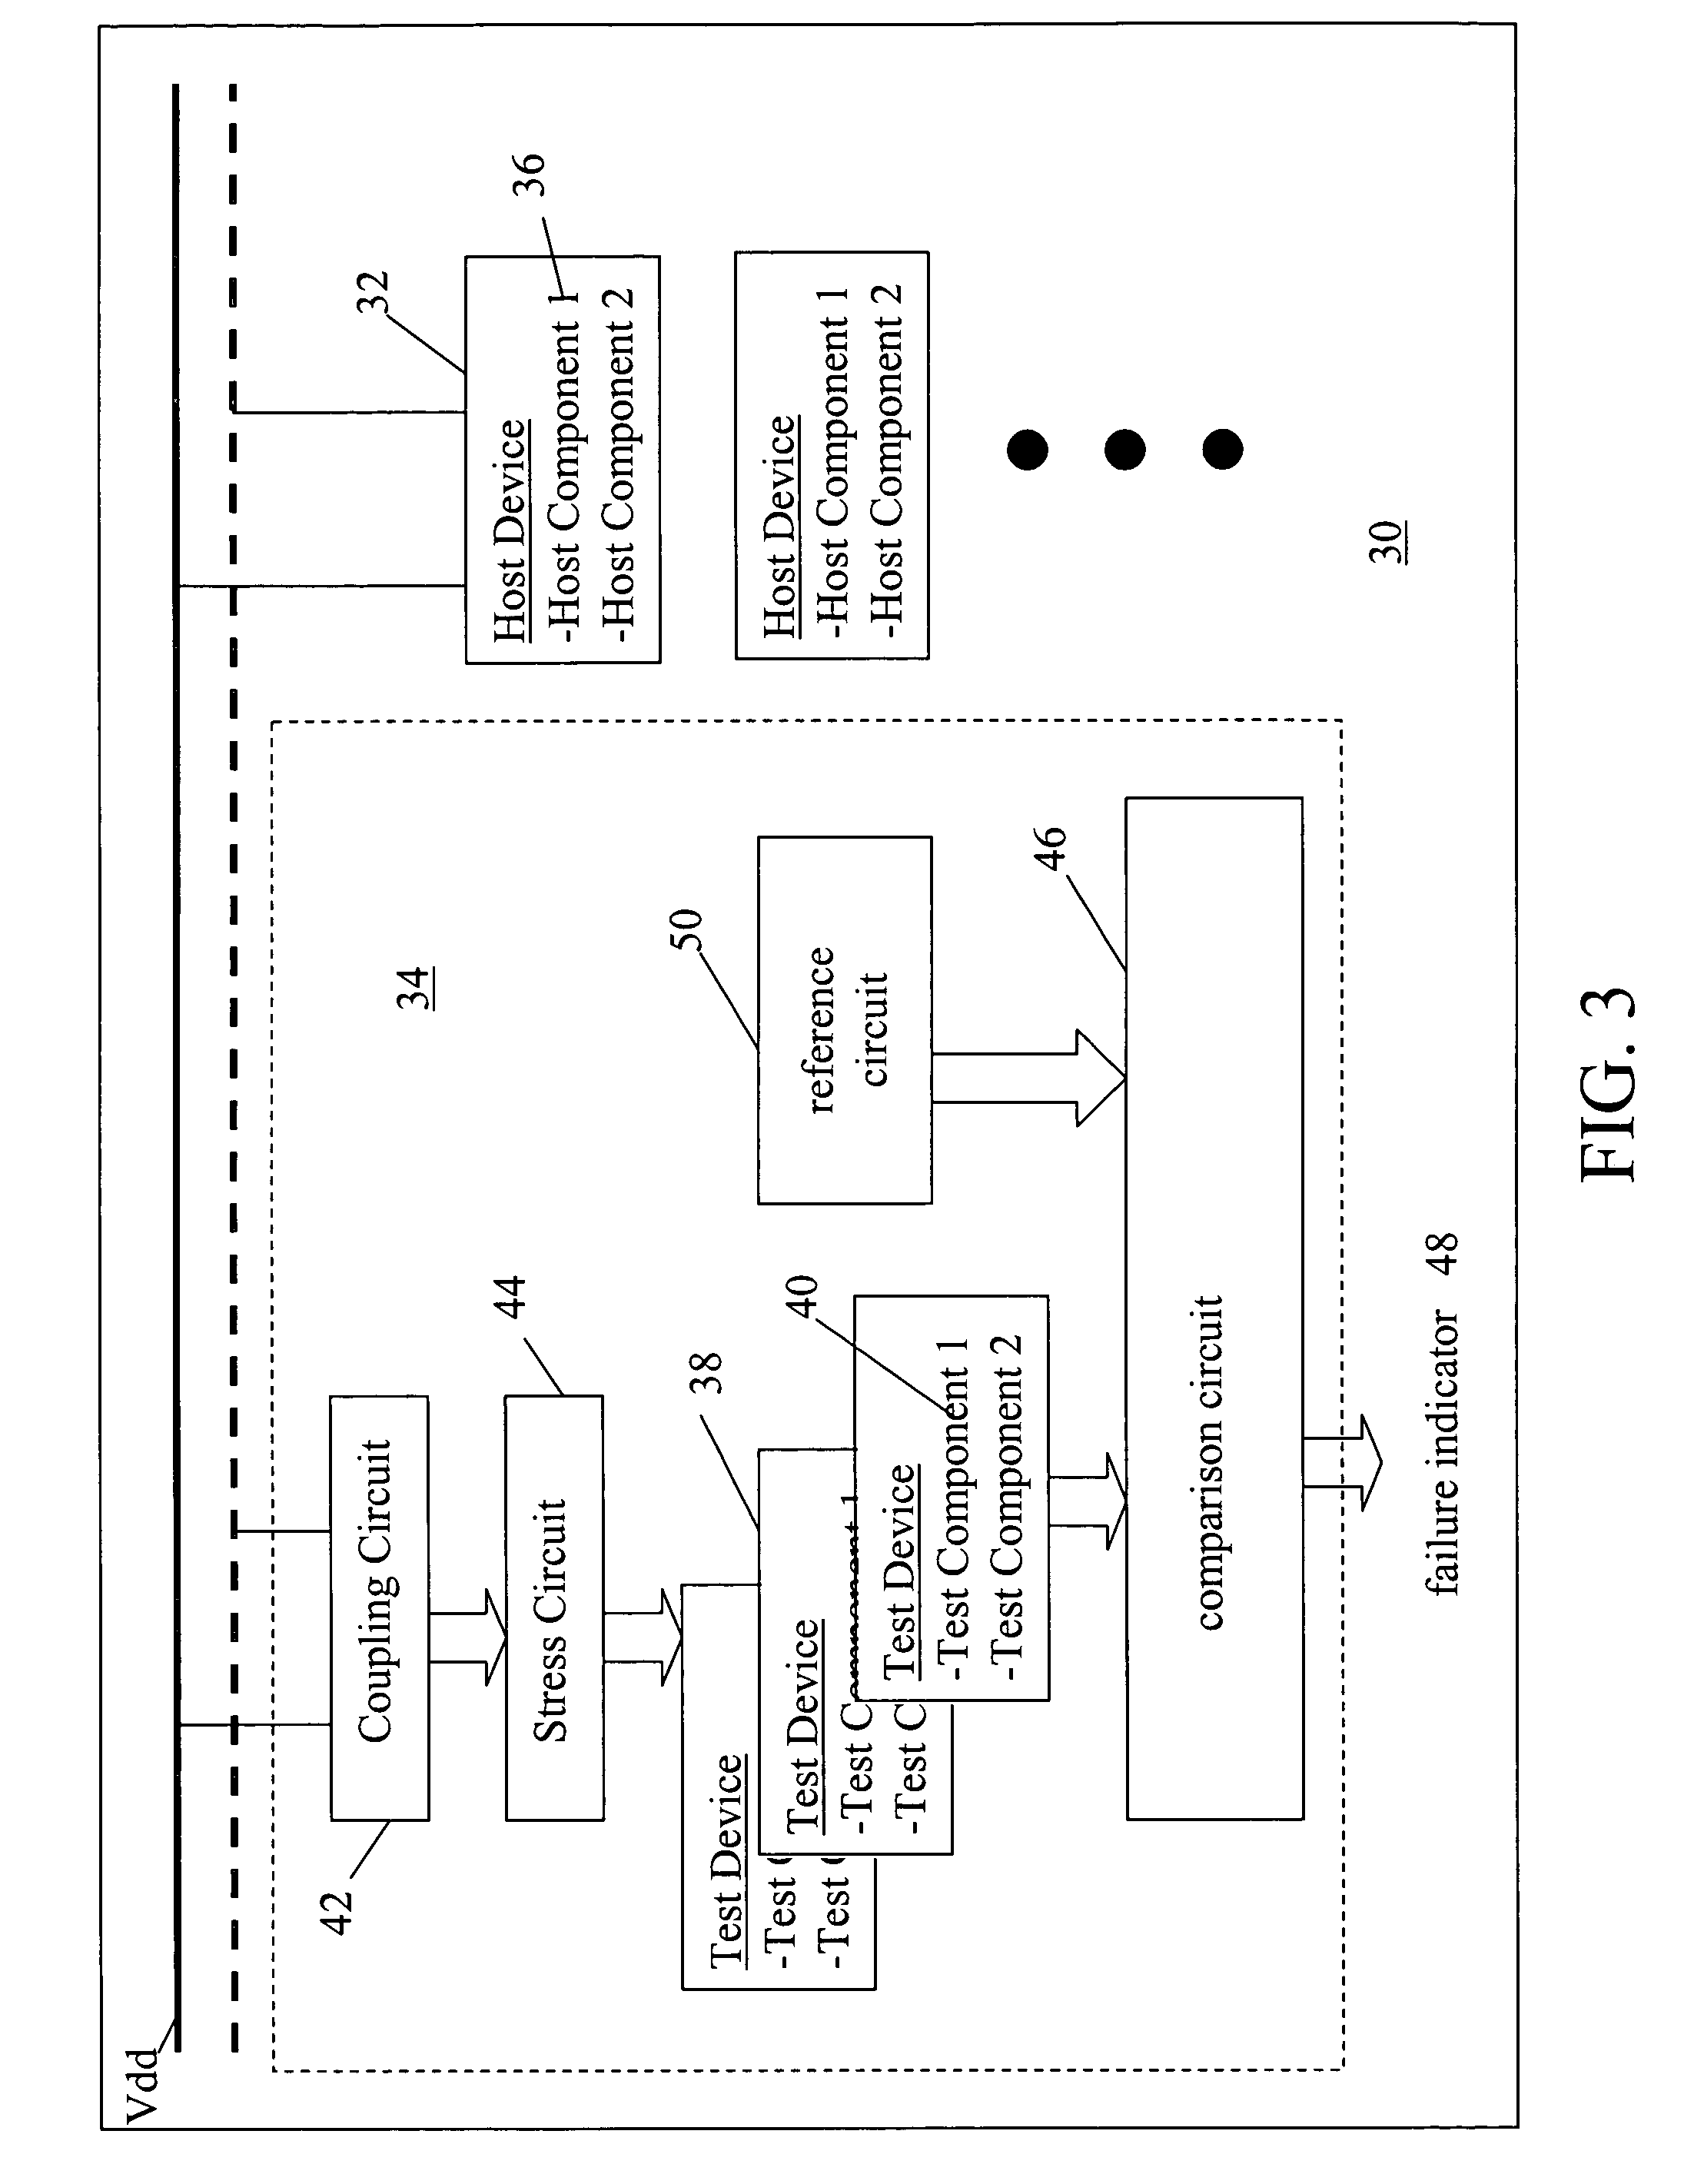 Prognostic cell for predicting failure of integrated circuits